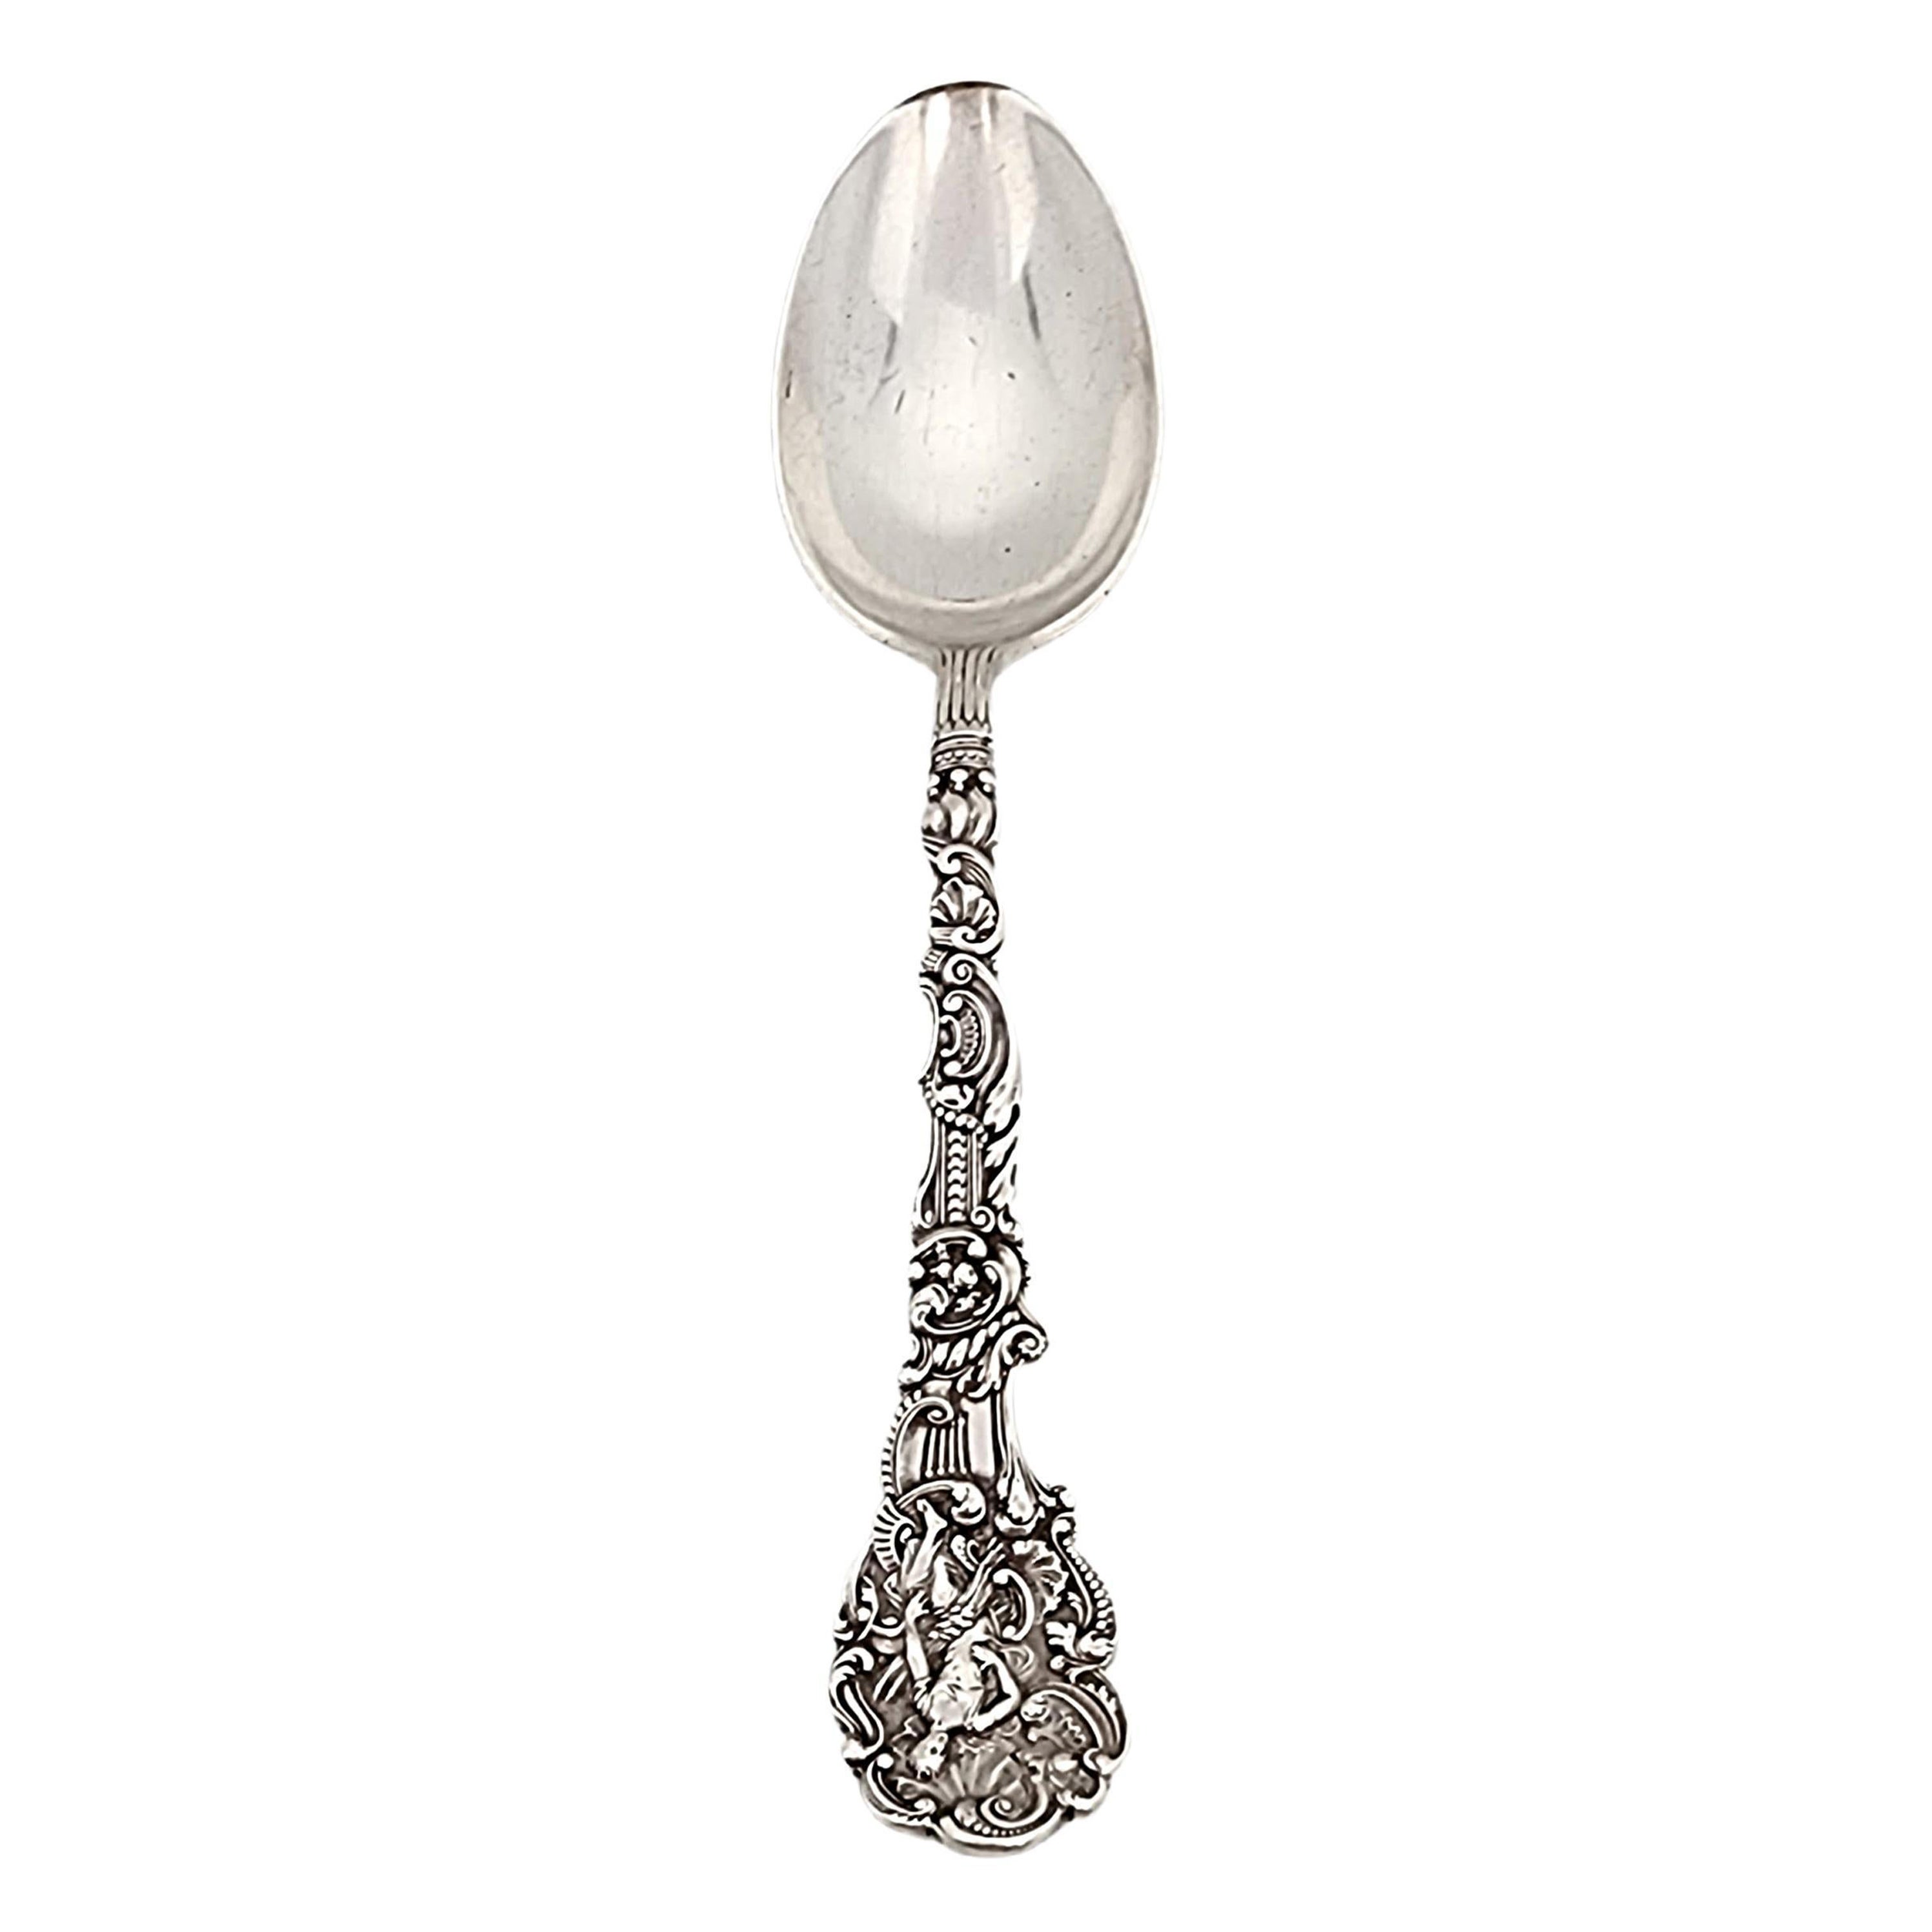 Gorham Versailles Sterling Silver Serving Tablespoon 8 3/8" #15660 For Sale